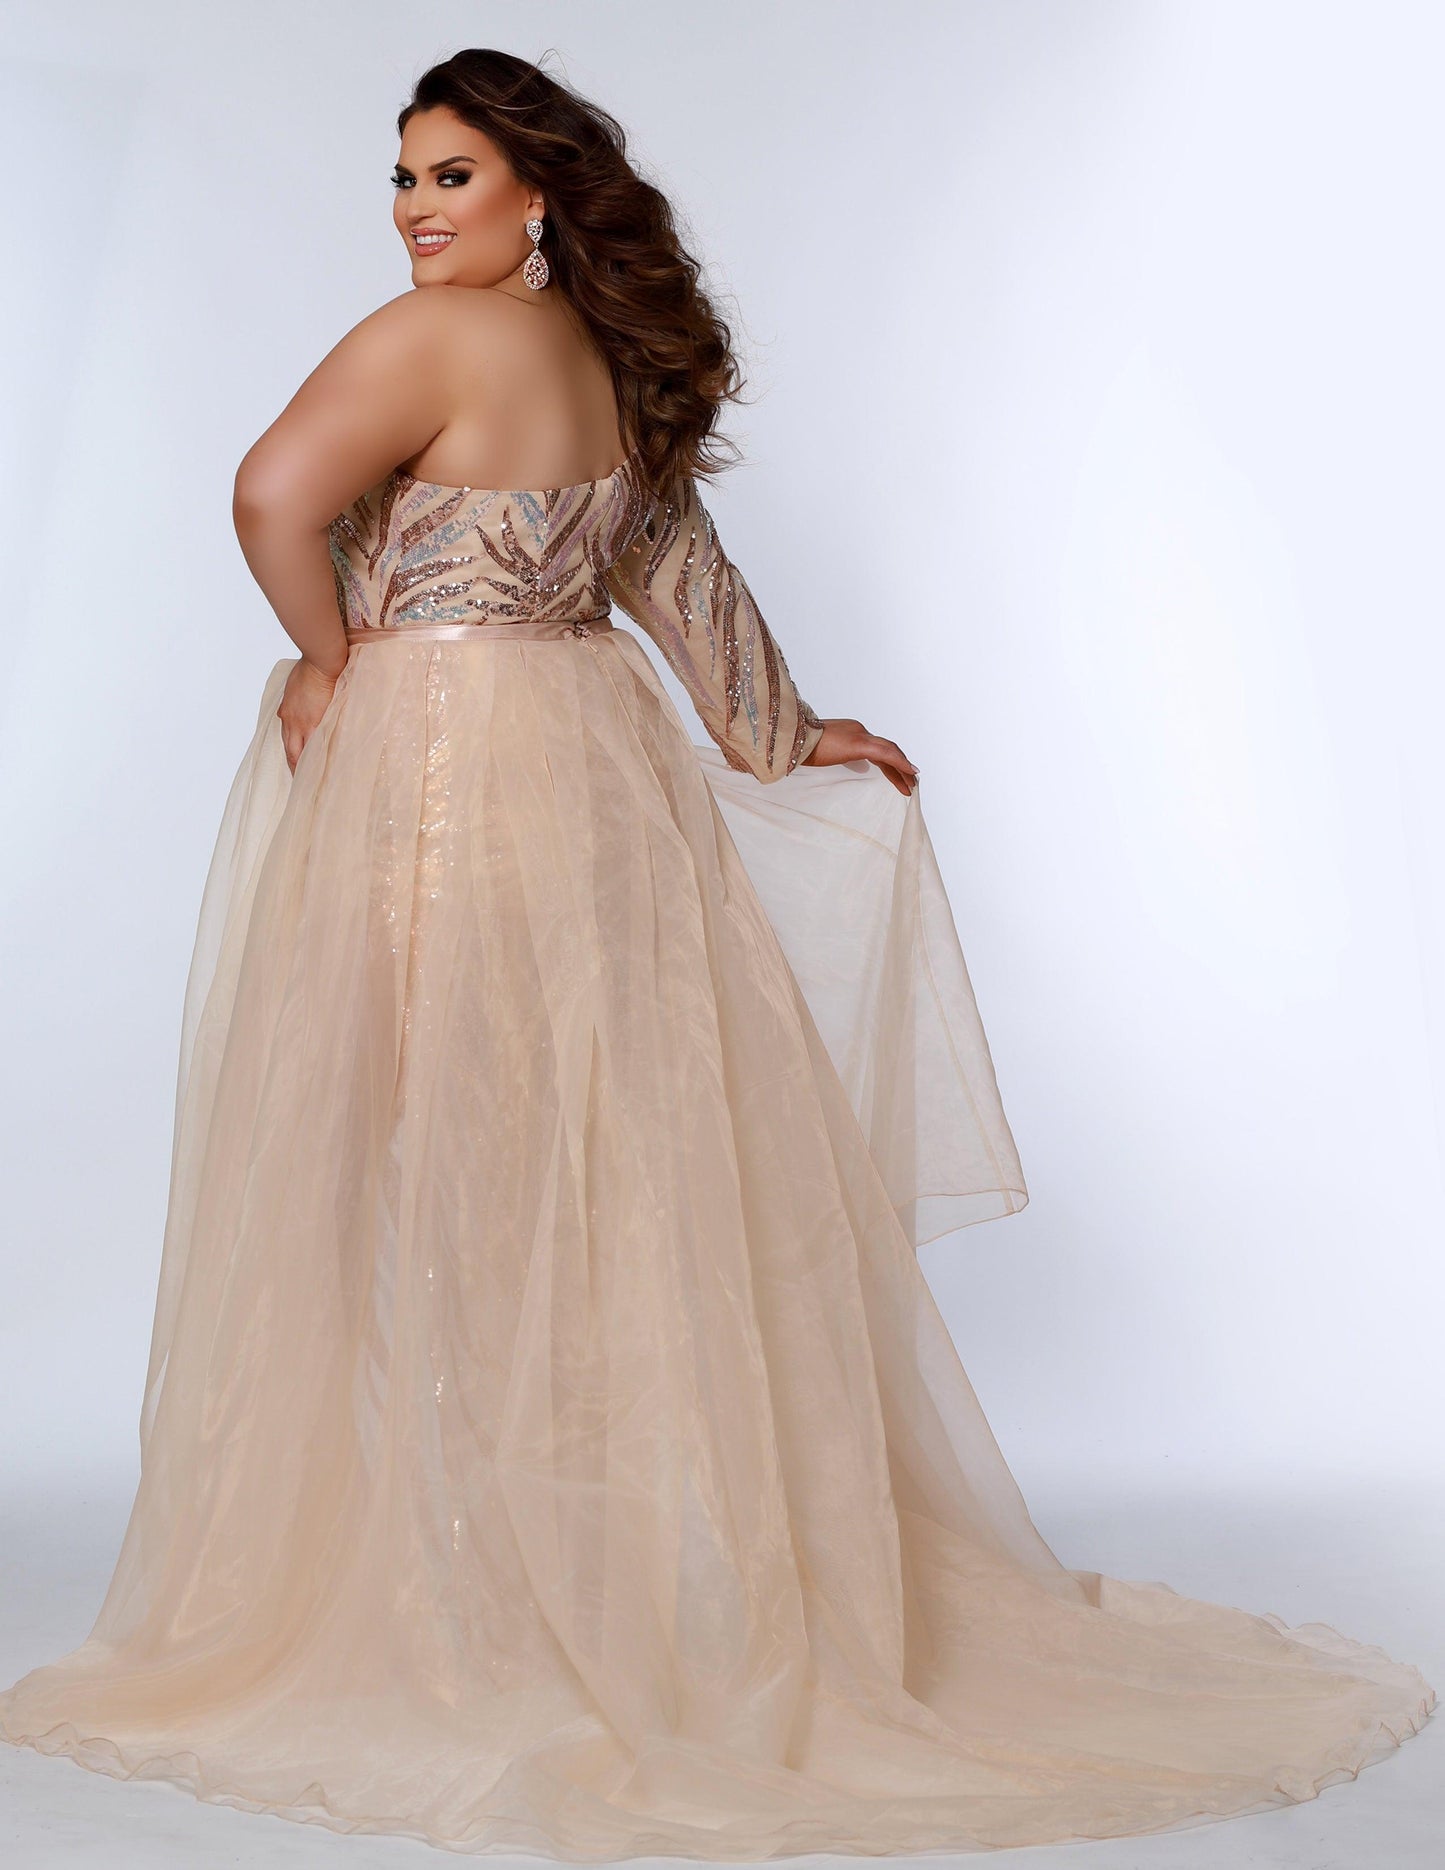 Prom Dresses Long Plus Size Formal Overskirt Prom Gown Champagne Swirl